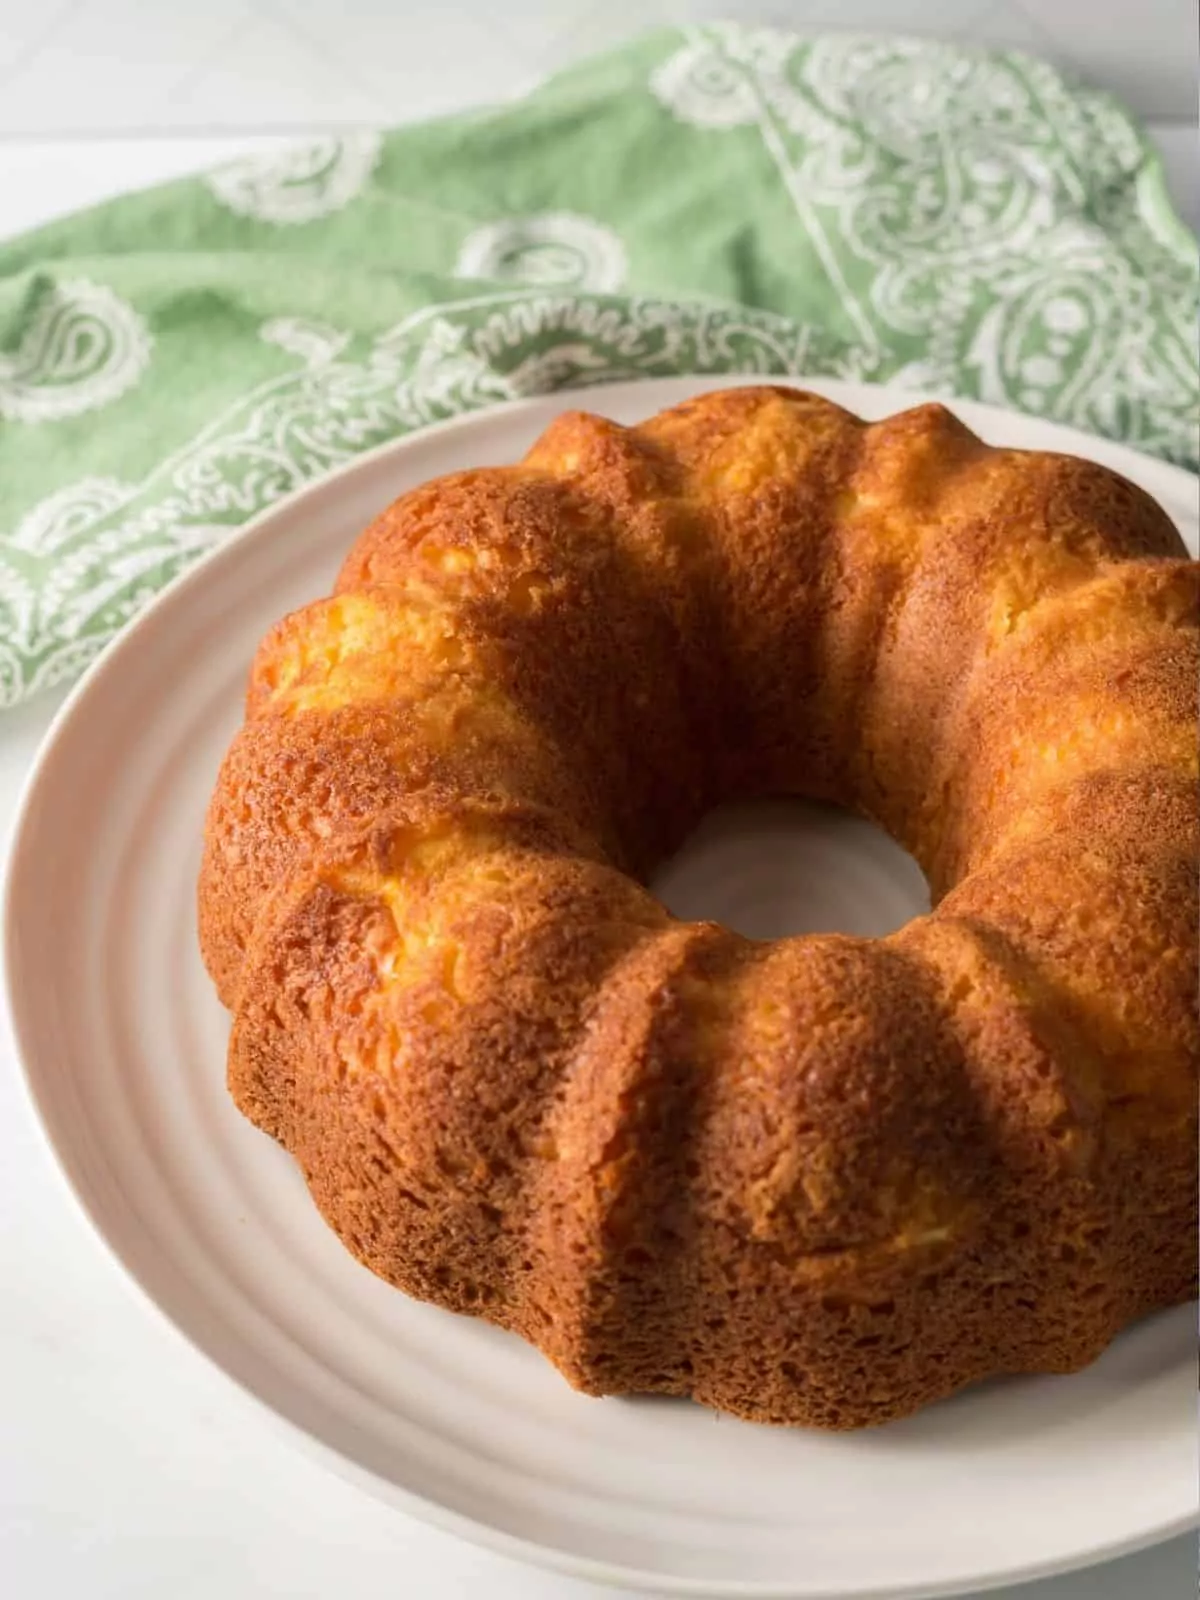 Peach bundt cake with no frosting on white plate.